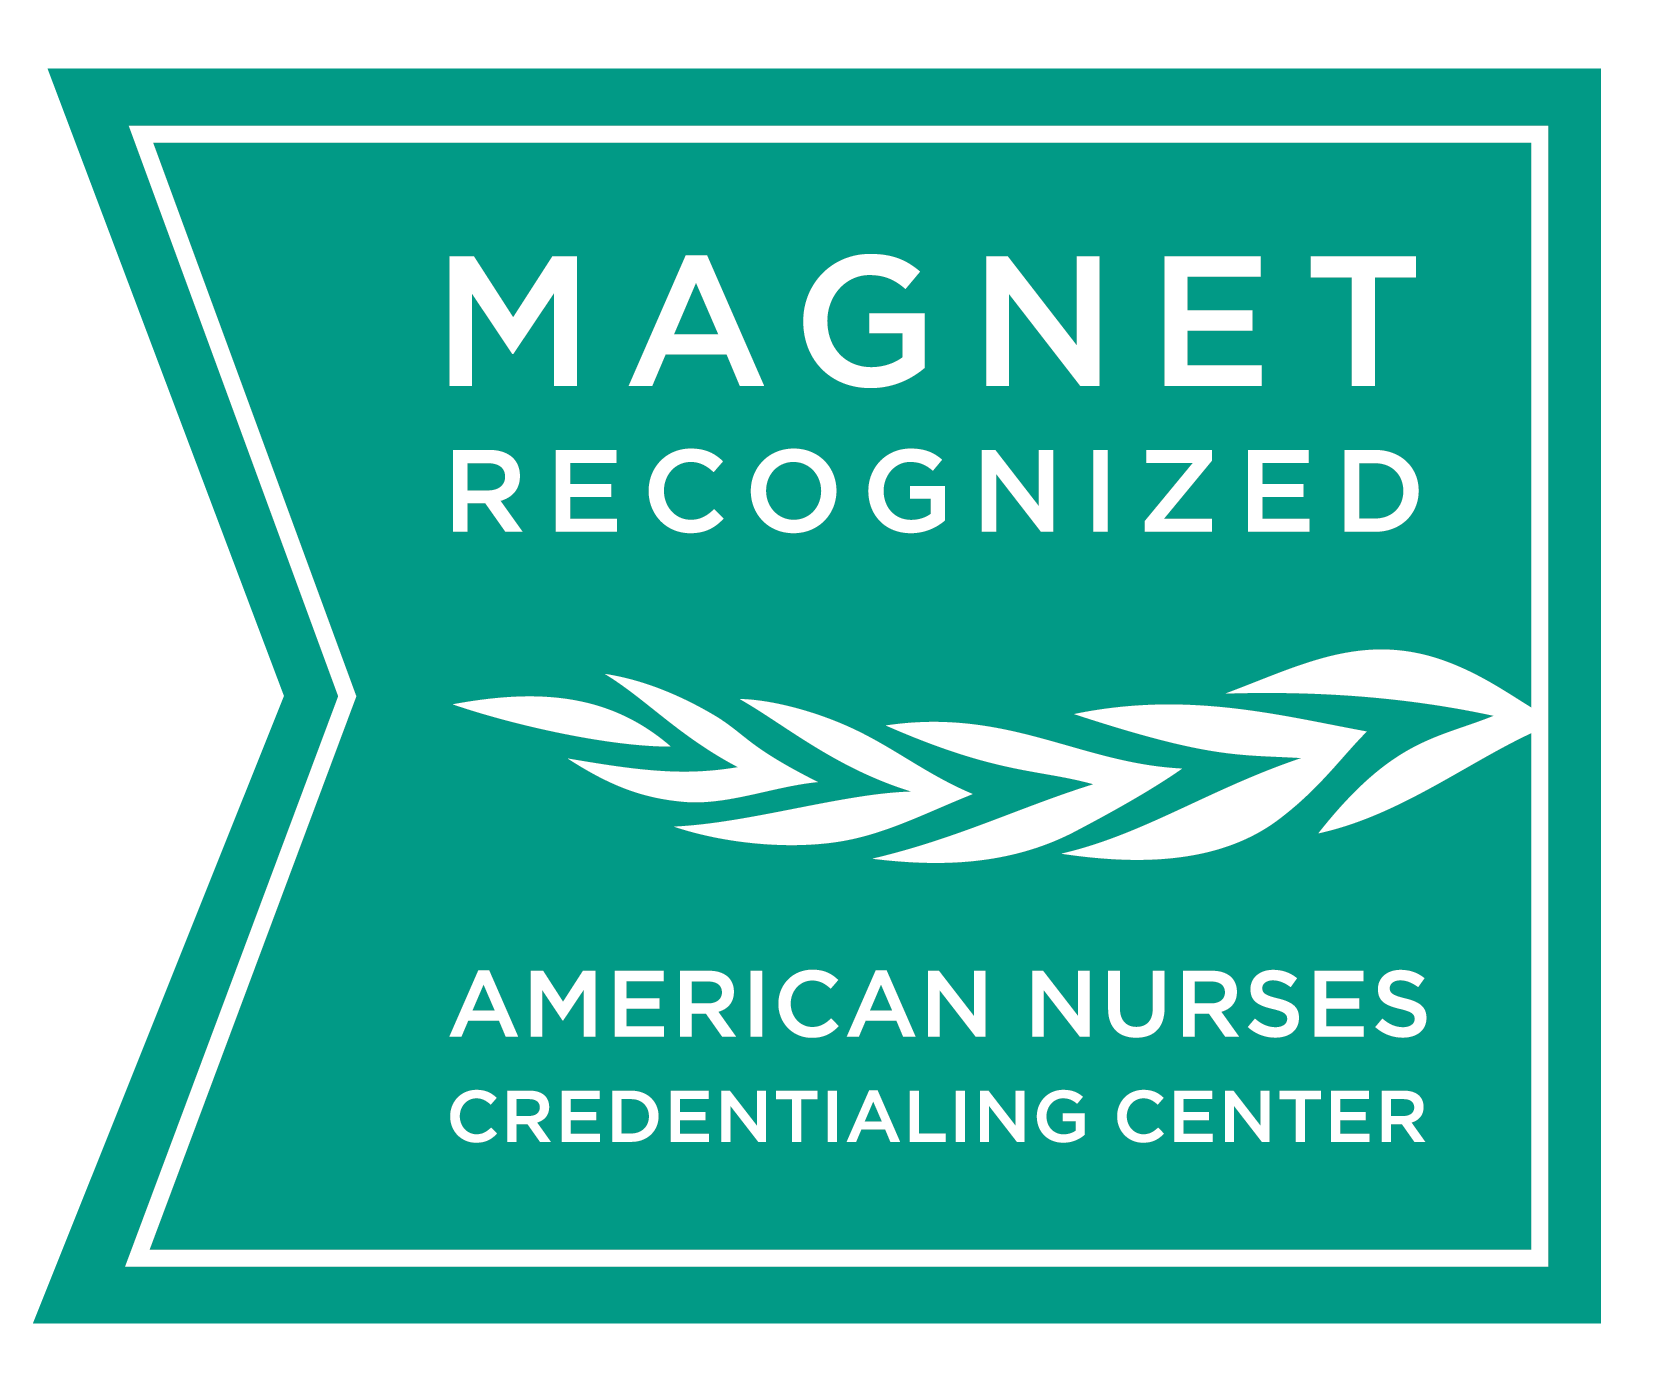 Image showing credential logo for magnet recognized